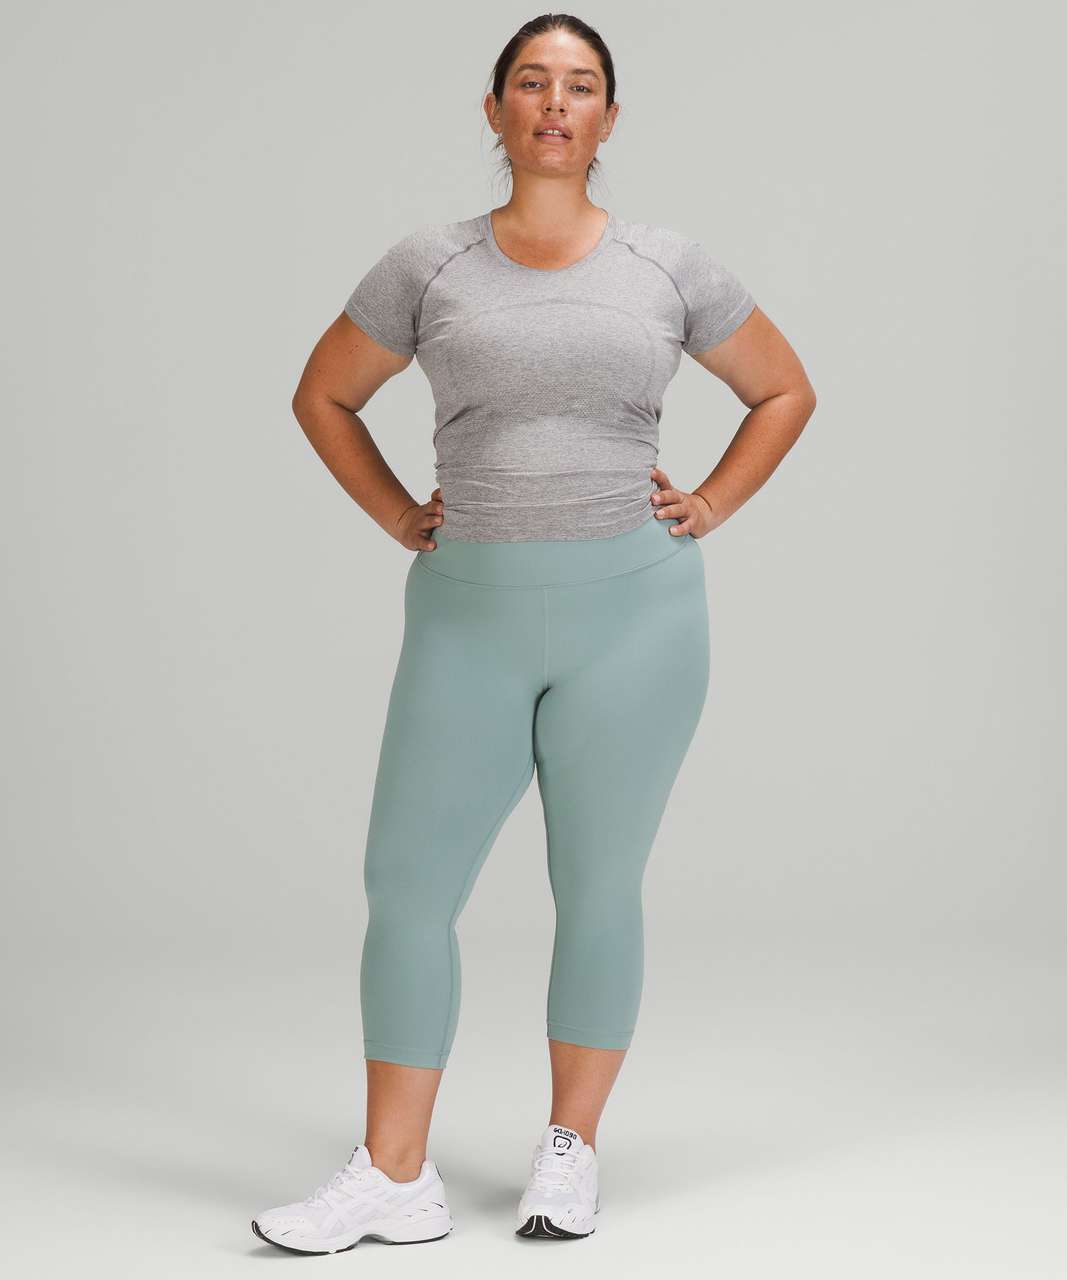 Obsessed with Misty Glade Wunder Train (8) and White Opal POCC (6)!  Heathered Rover Align Tank (8) underneath. Wish they'd offer more items in  all of these colors! : r/lululemon